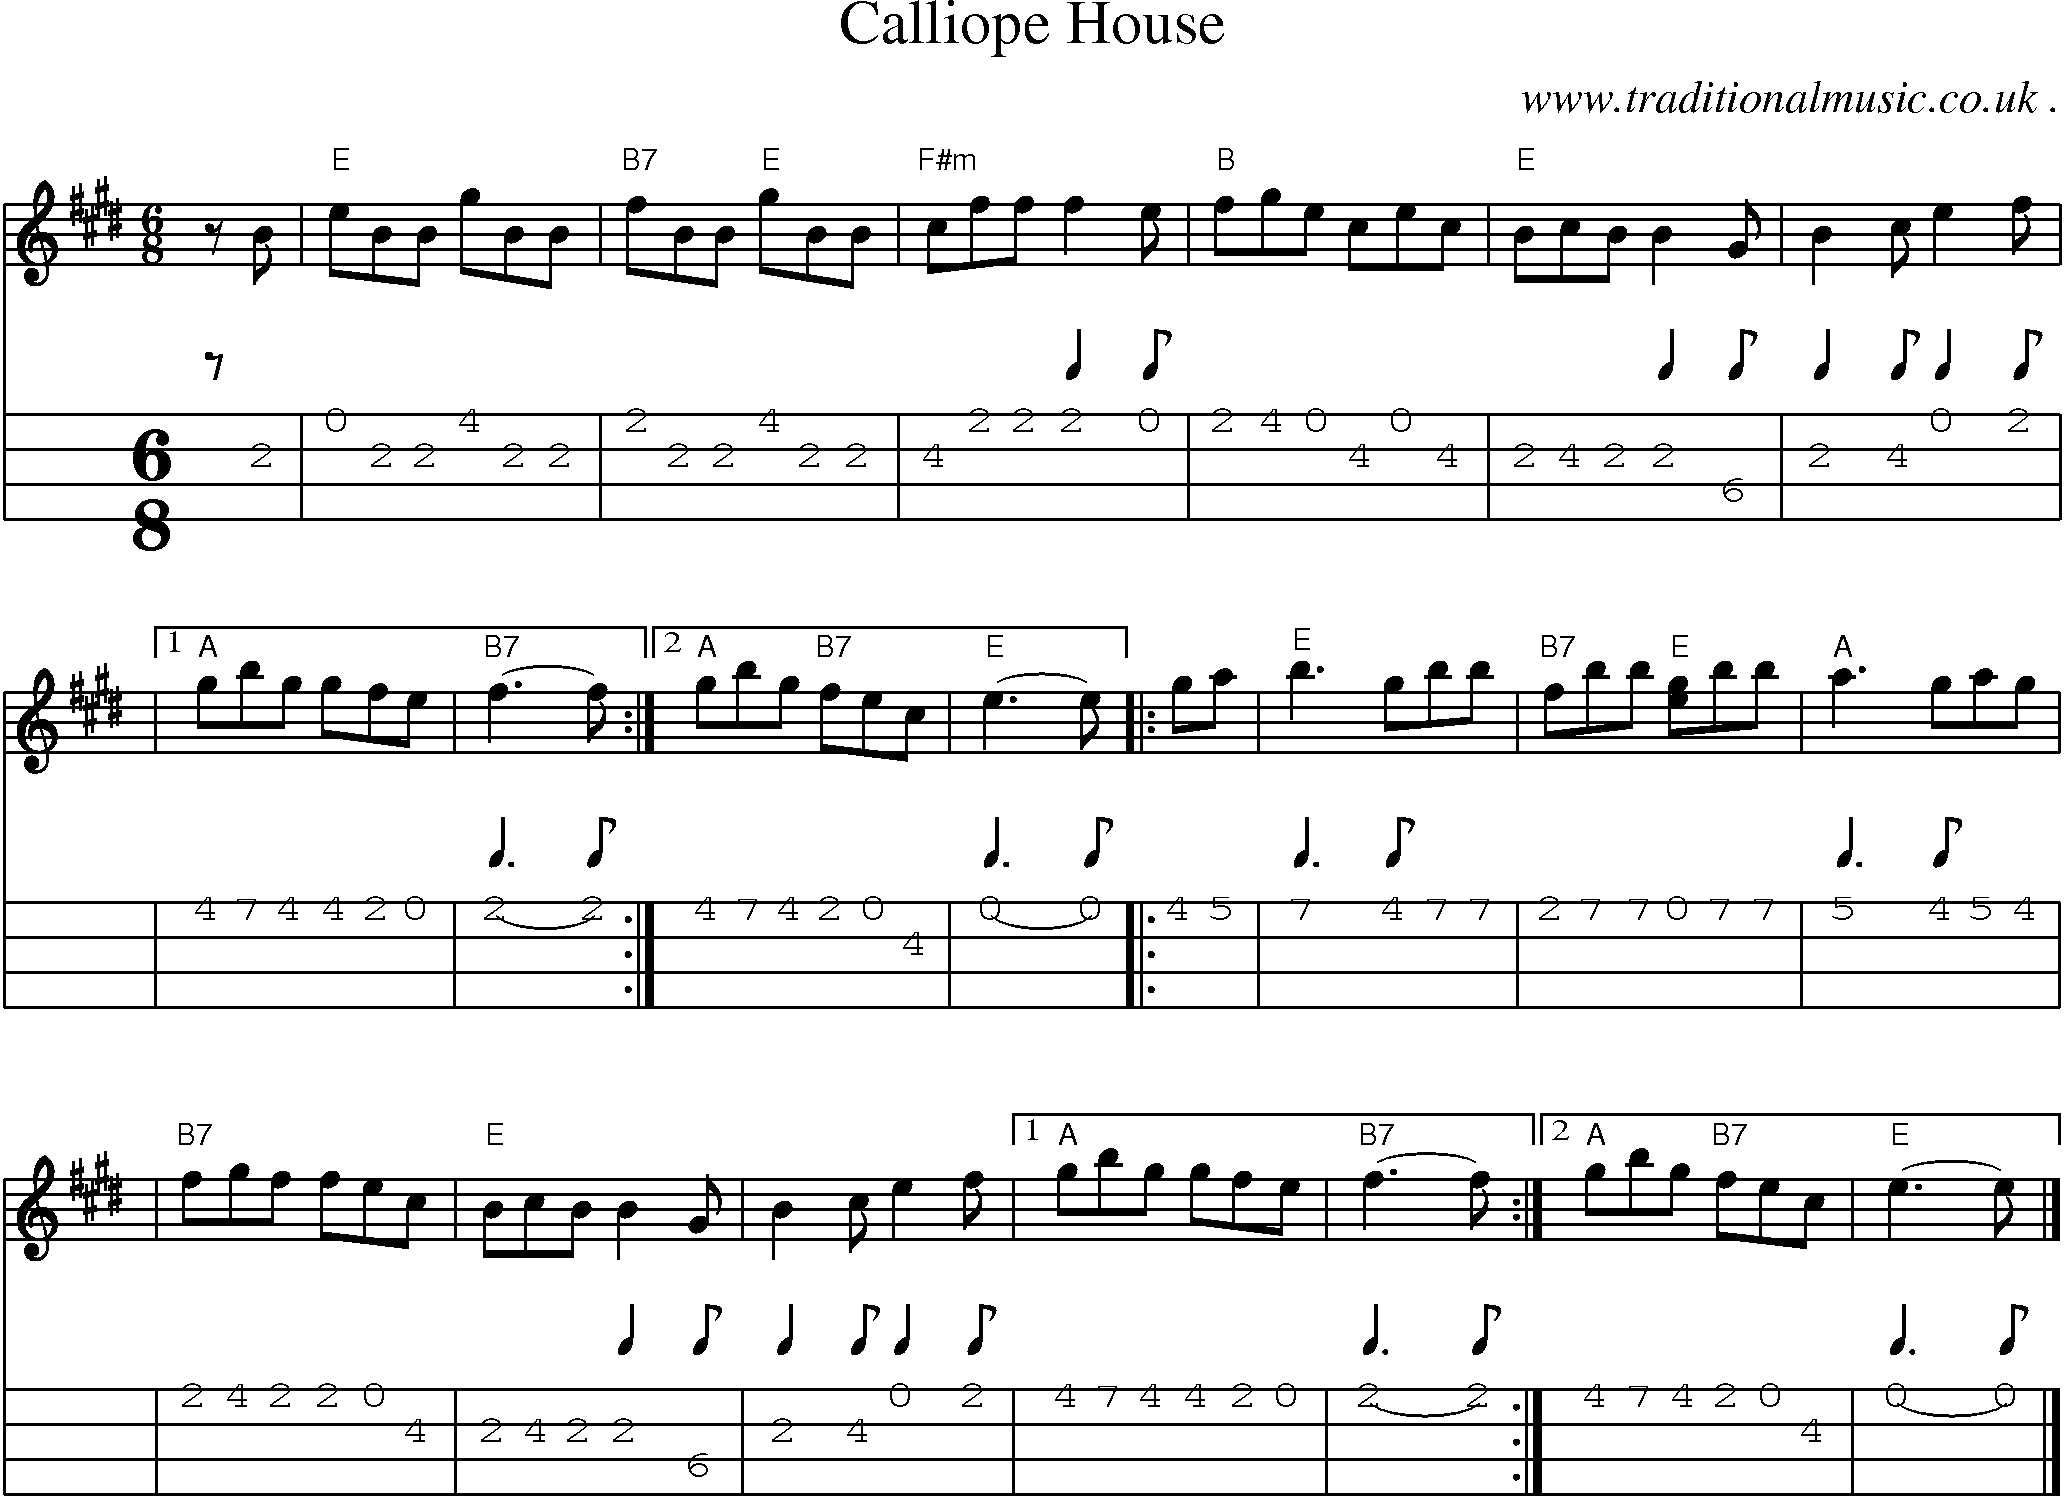 Sheet-music  score, Chords and Mandolin Tabs for Calliope House